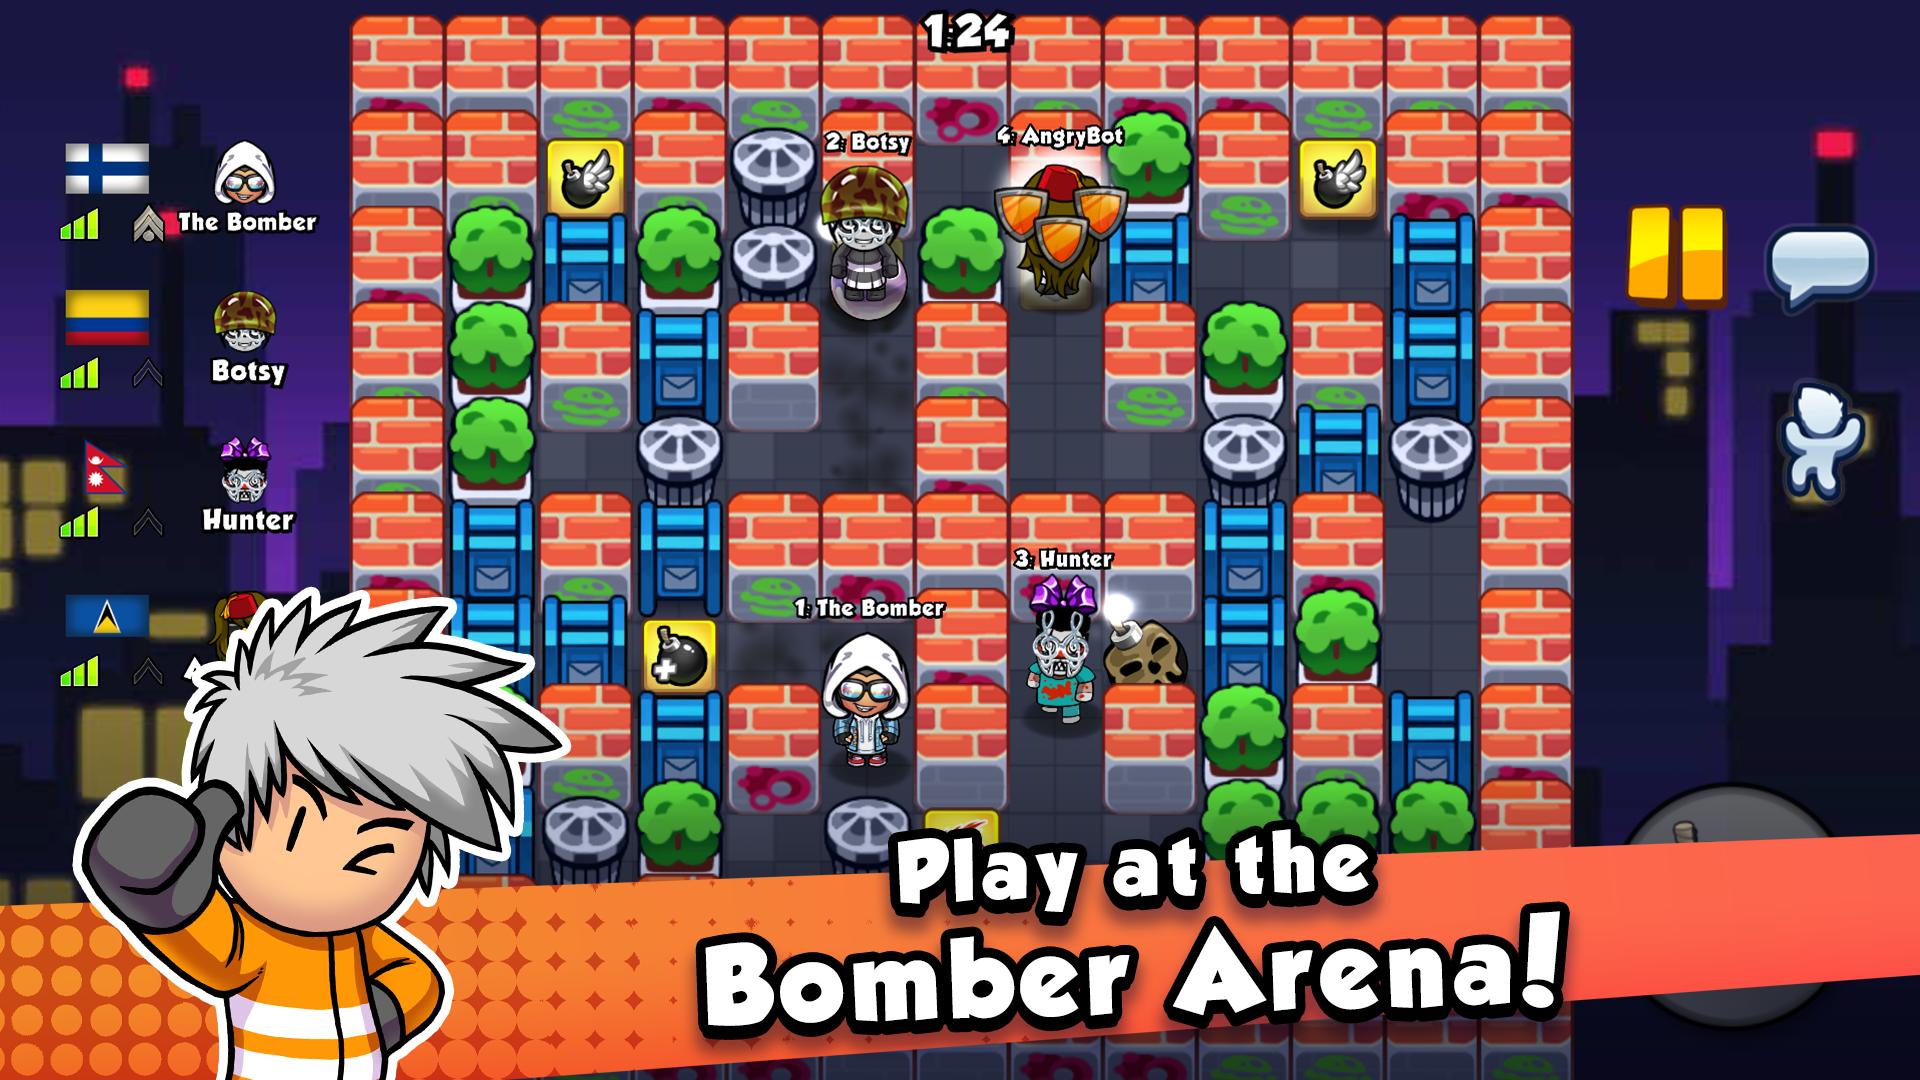 Bomber Friends Controller Support